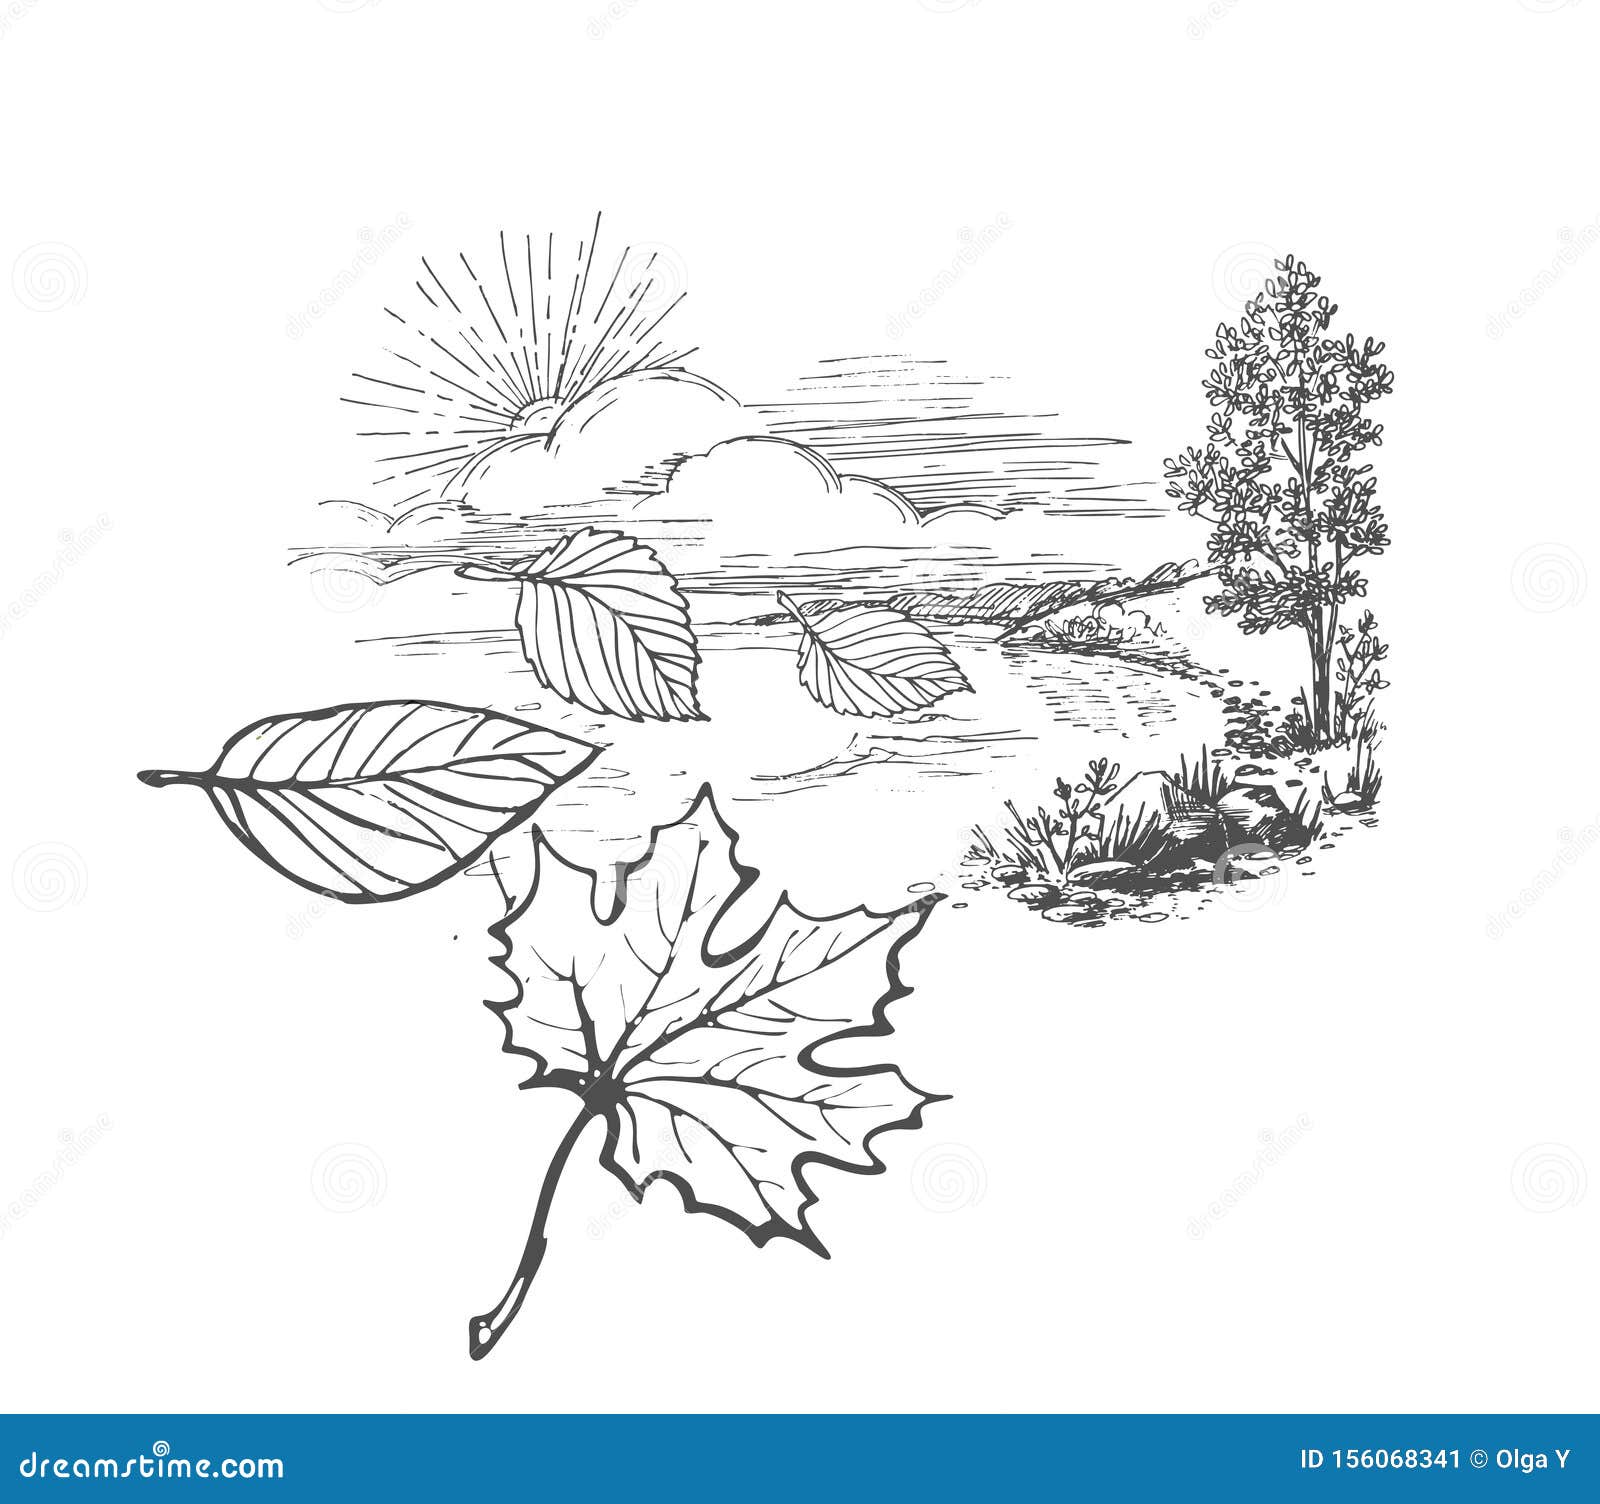 Hand Drawn Sketch On An Autumn Theme Landscape With Trees Sun And Flying Away Fallen Leaves Stock Vector Illustration Of Black Drawing